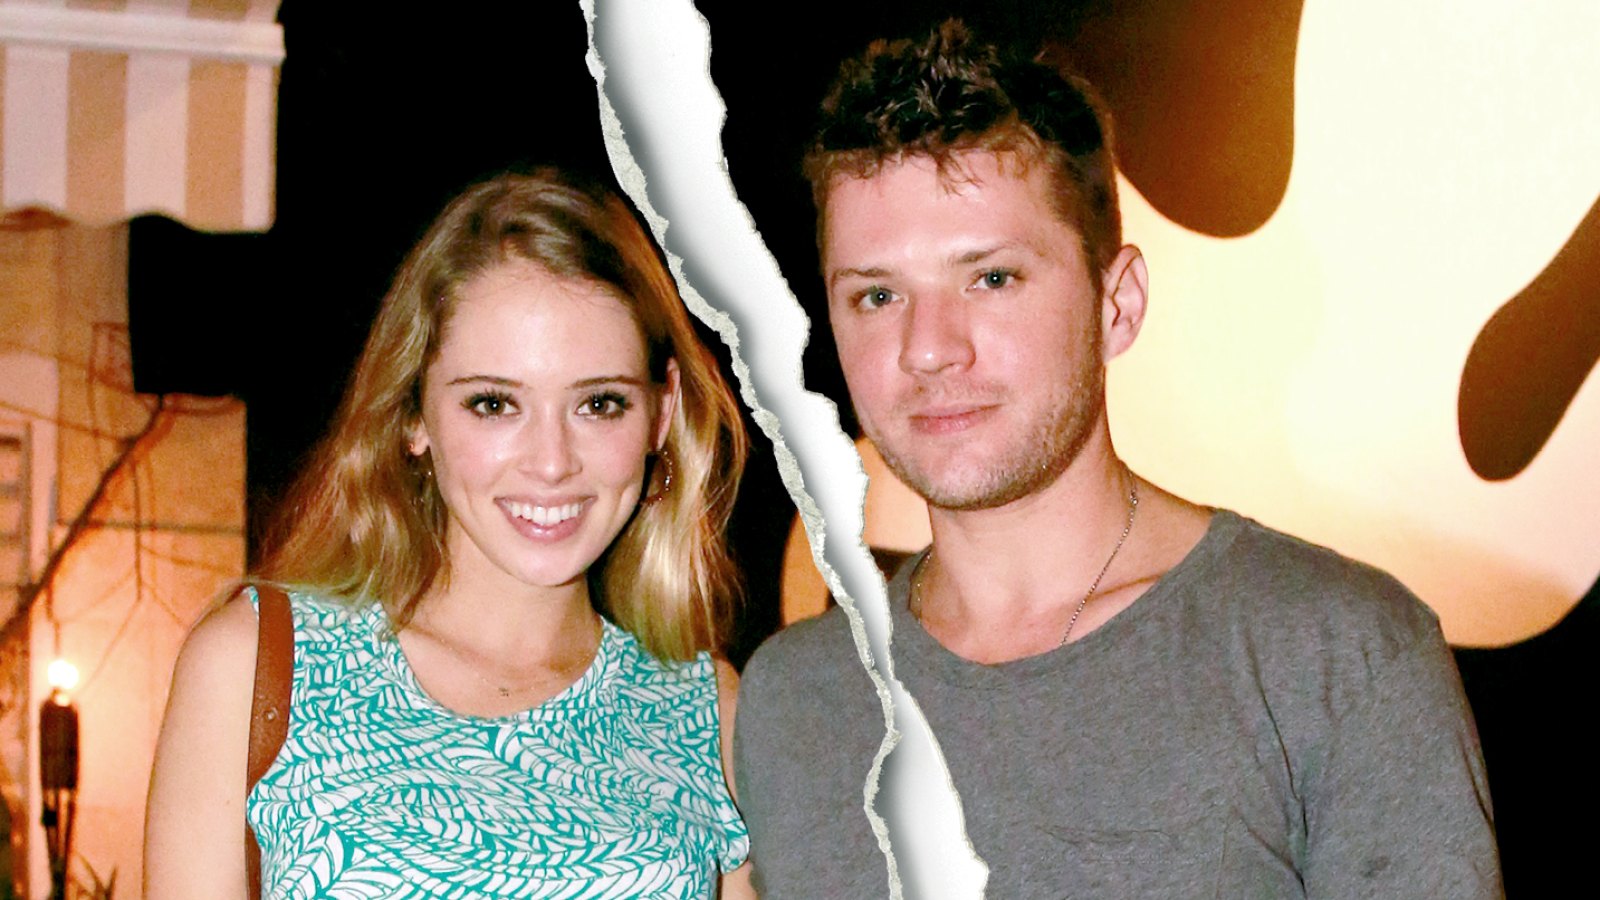 Paulina Slagter and Ryan Phillippe pose for a photo at Salt and Pepper on January 1, 2014 in Miami, Florida.